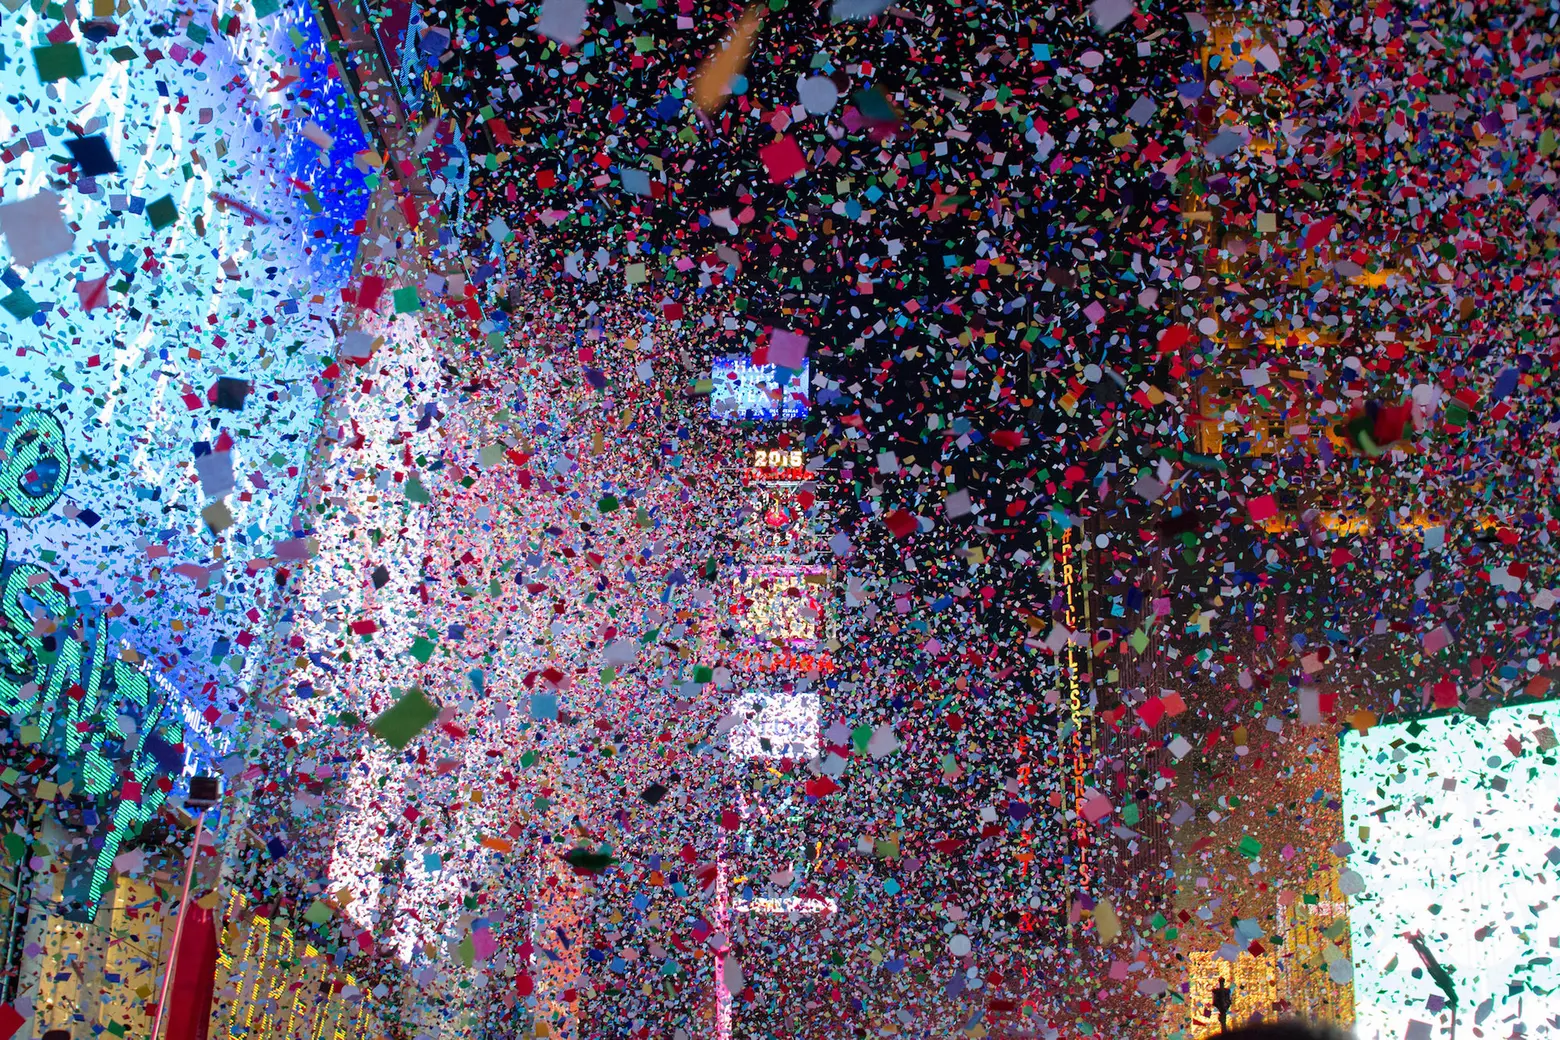 Confetti falls on a deserted Times Square as New York forges ahead. - The  New York Times